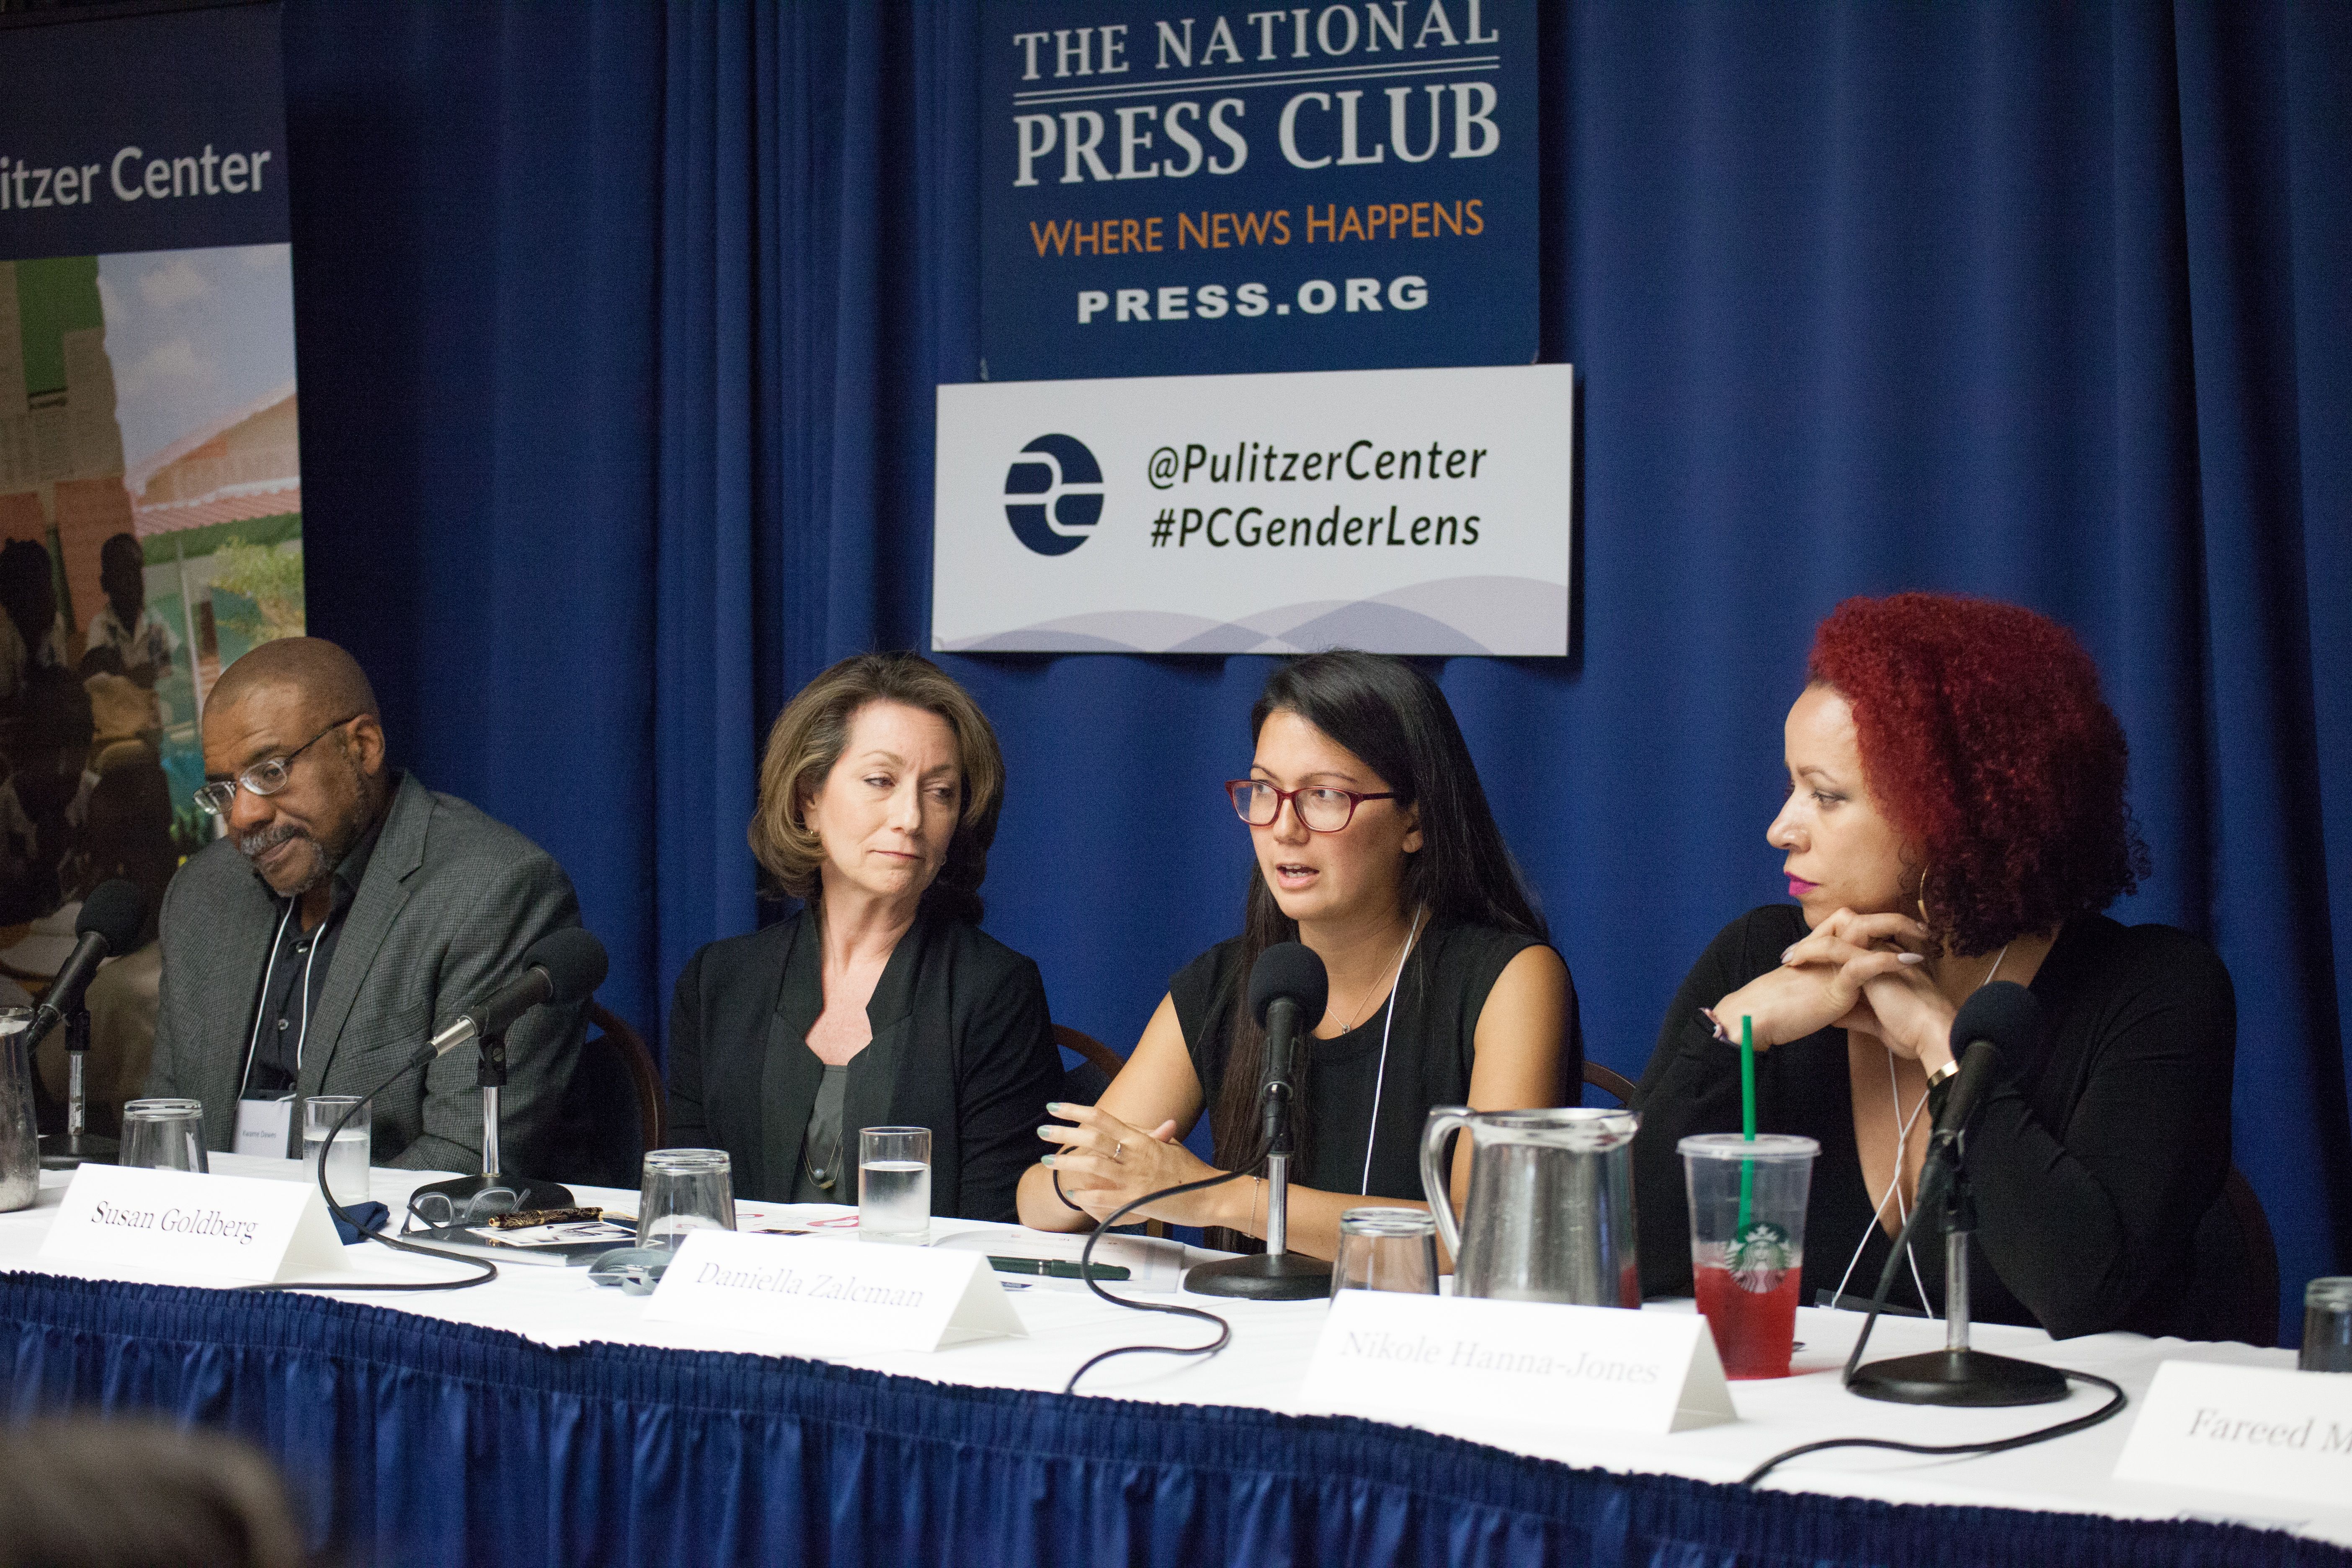 (Left to right) Kwame Dawes, Susan Goldberg, Daniella Zalcman, and Nikole Hannah-Jones speak on Diversifying the Story panel at Pulitzer Center Gender Lens Conference. Image by Sydney Combs. United States, 2017. 